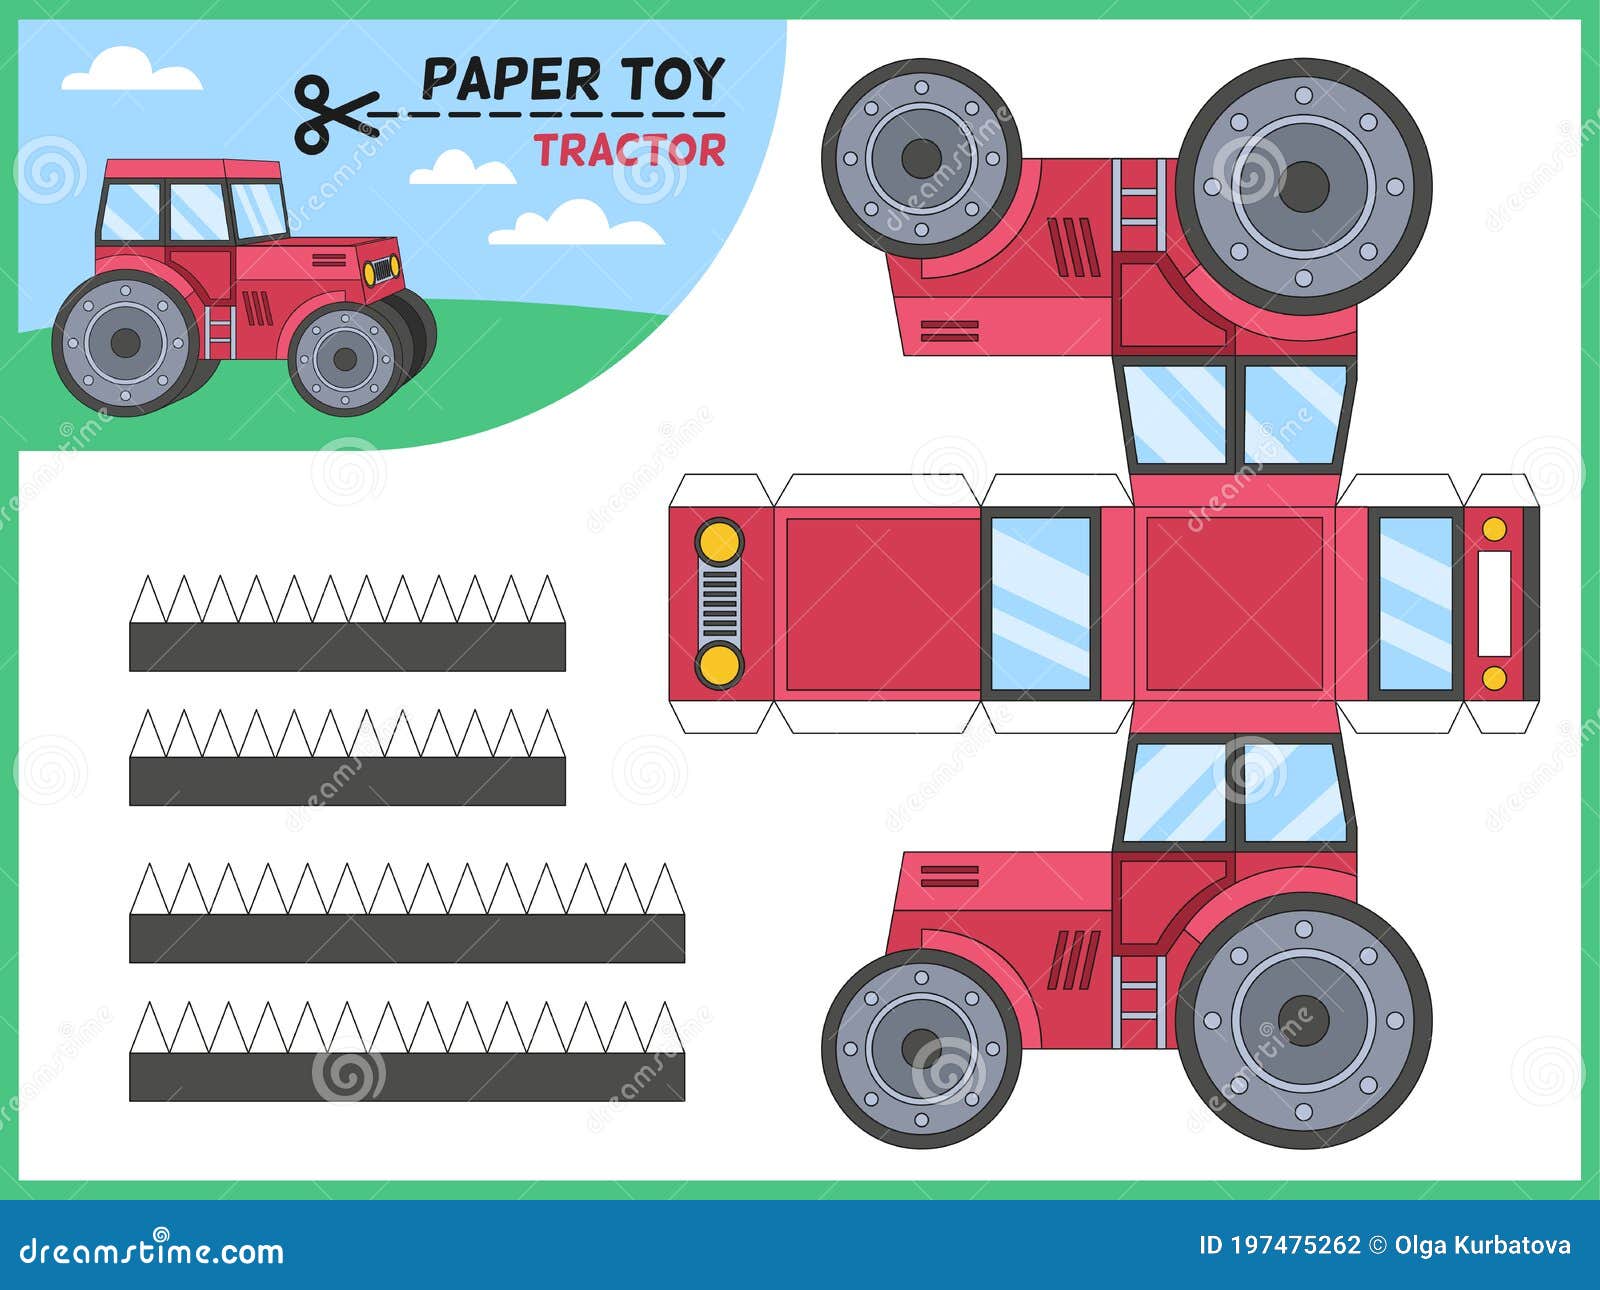 tractor paper cut toy. kids handmade educational game printable 3d paper model, worksheet with tractors s